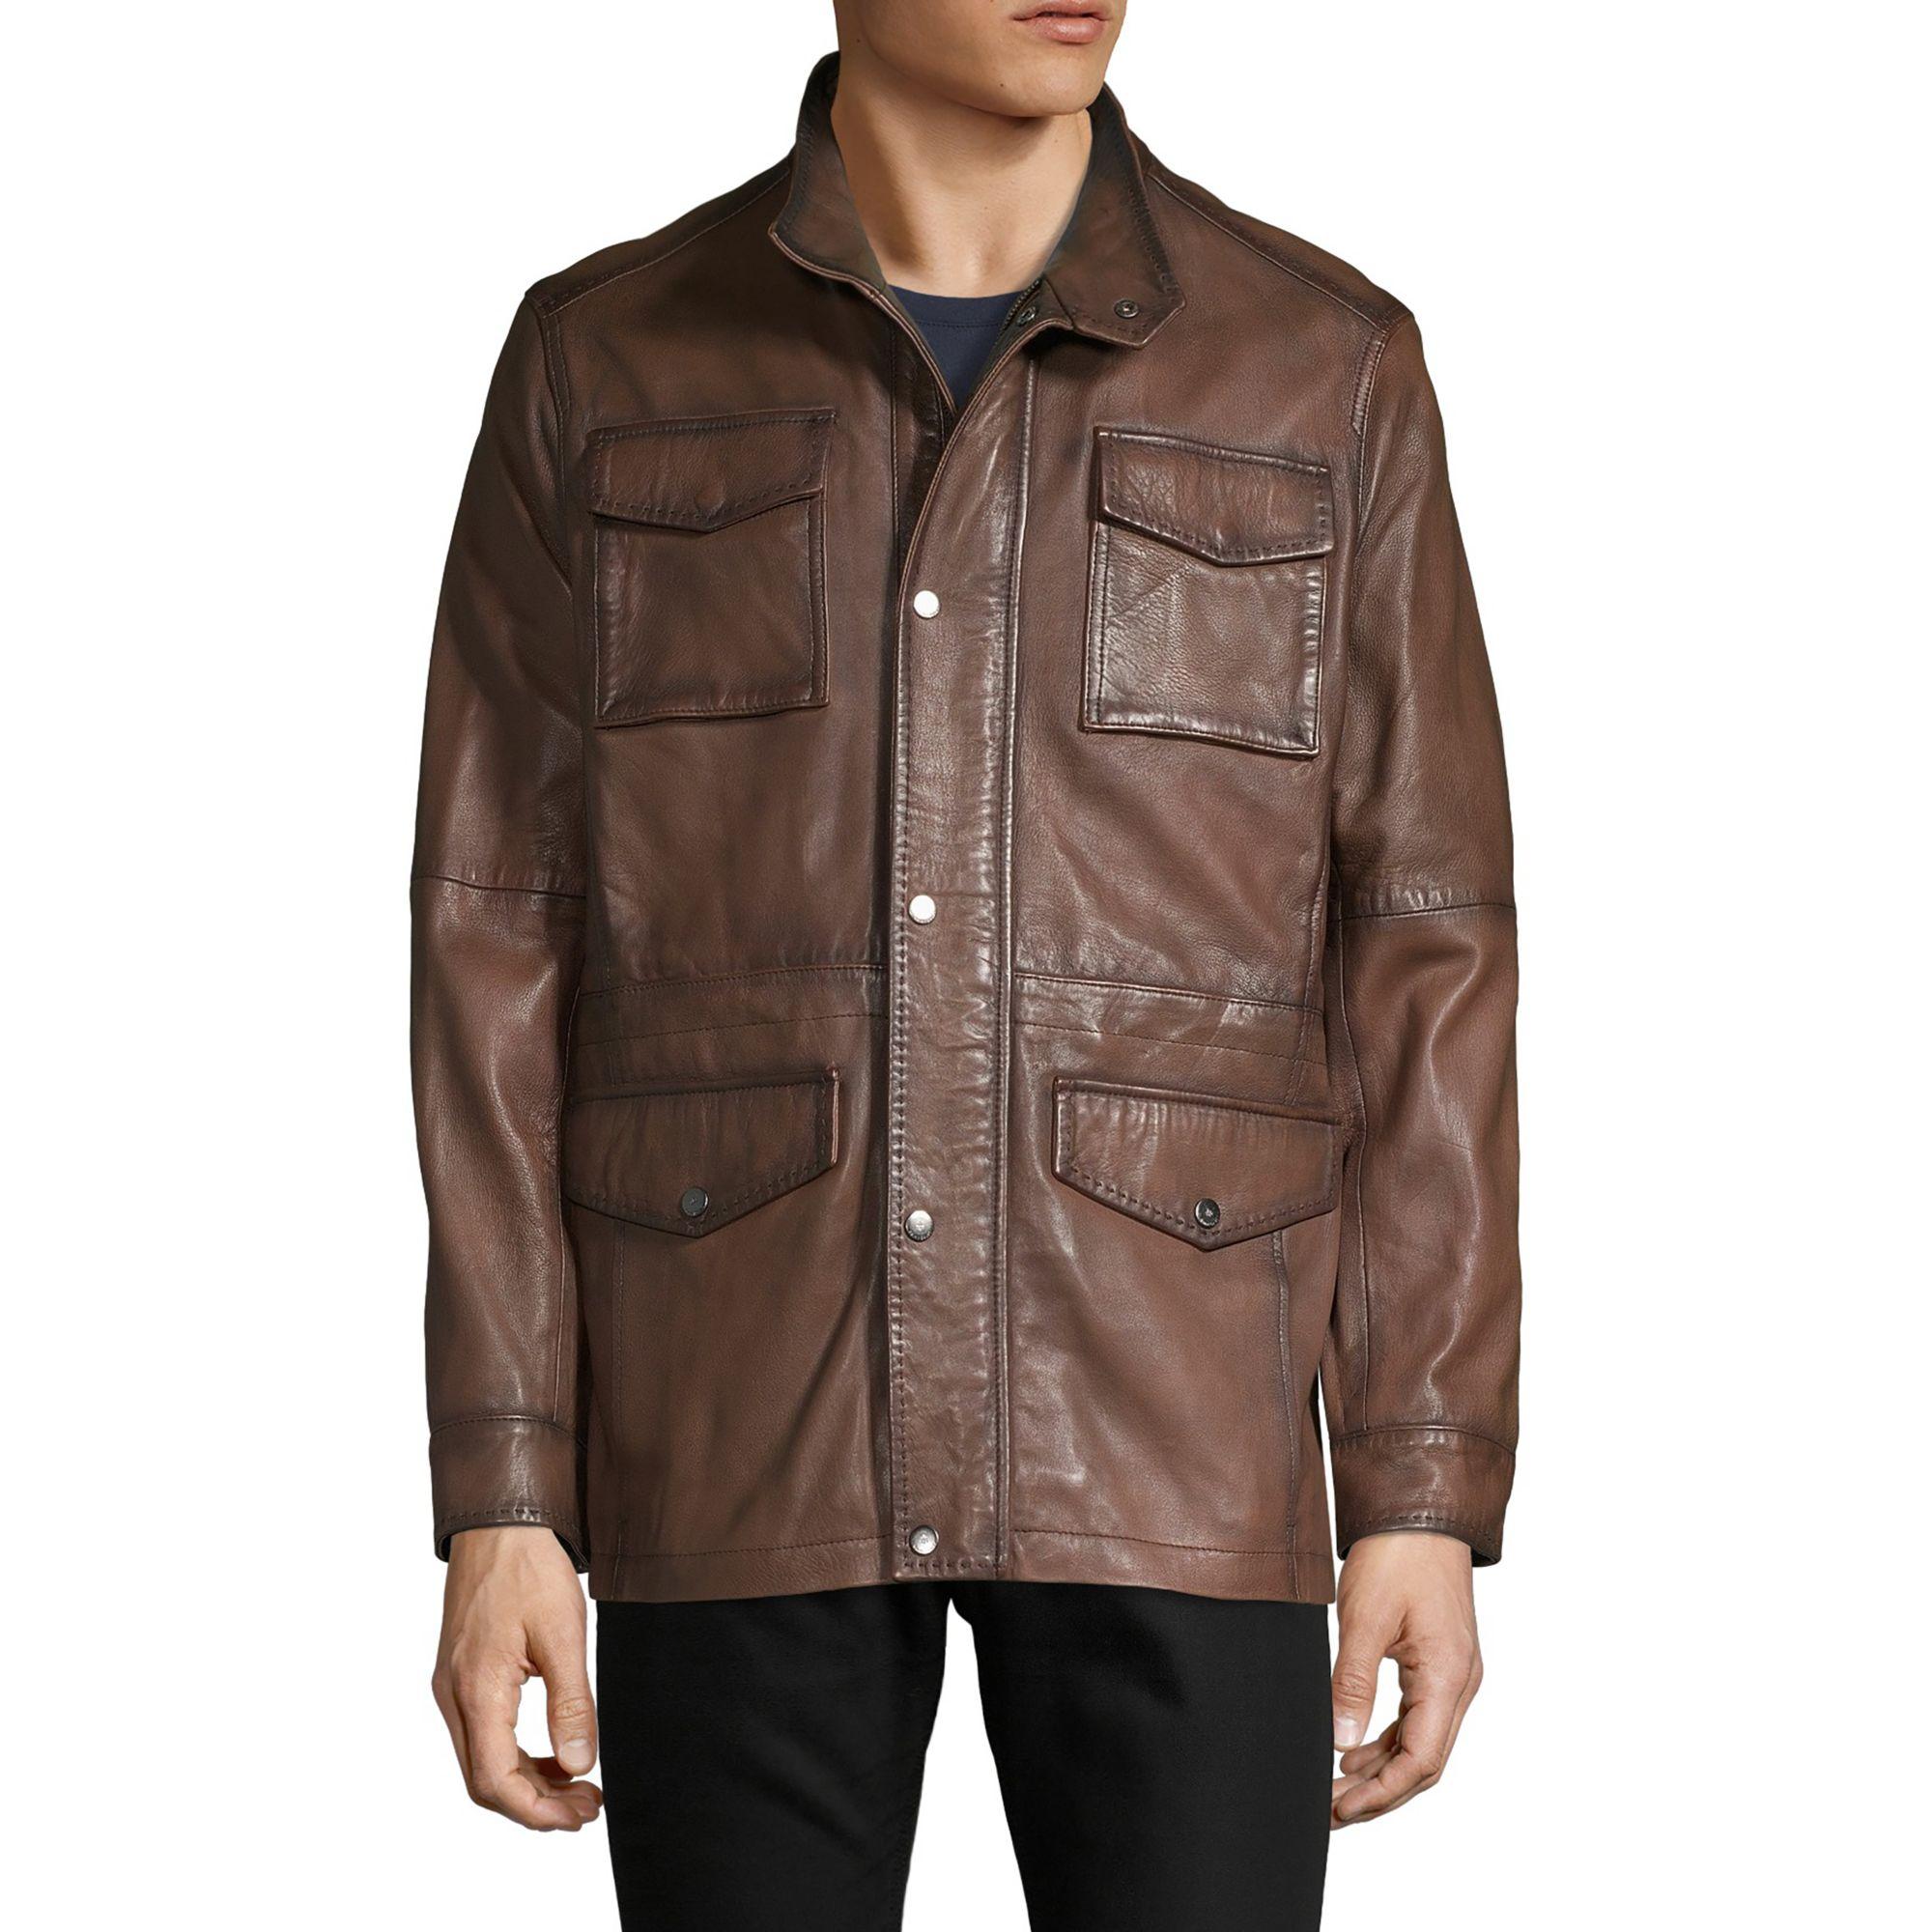 Rainforest Leather Patch Pocket Jacket in Brown for Men - Lyst